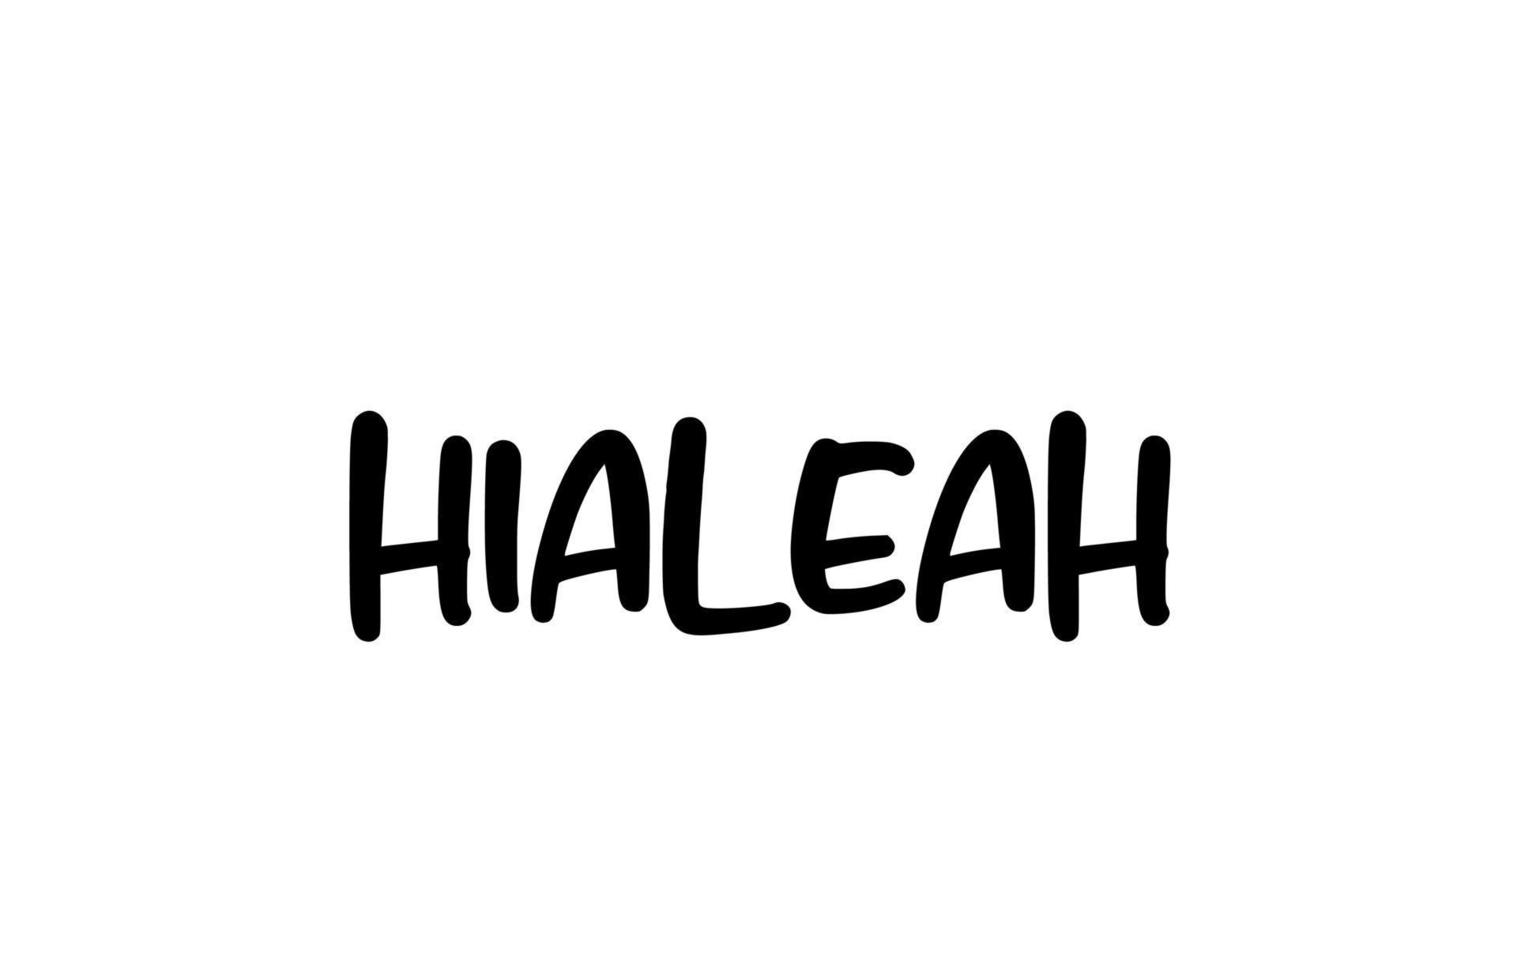 Hialeah city handwritten typography word text hand lettering. Modern calligraphy text. Black color vector